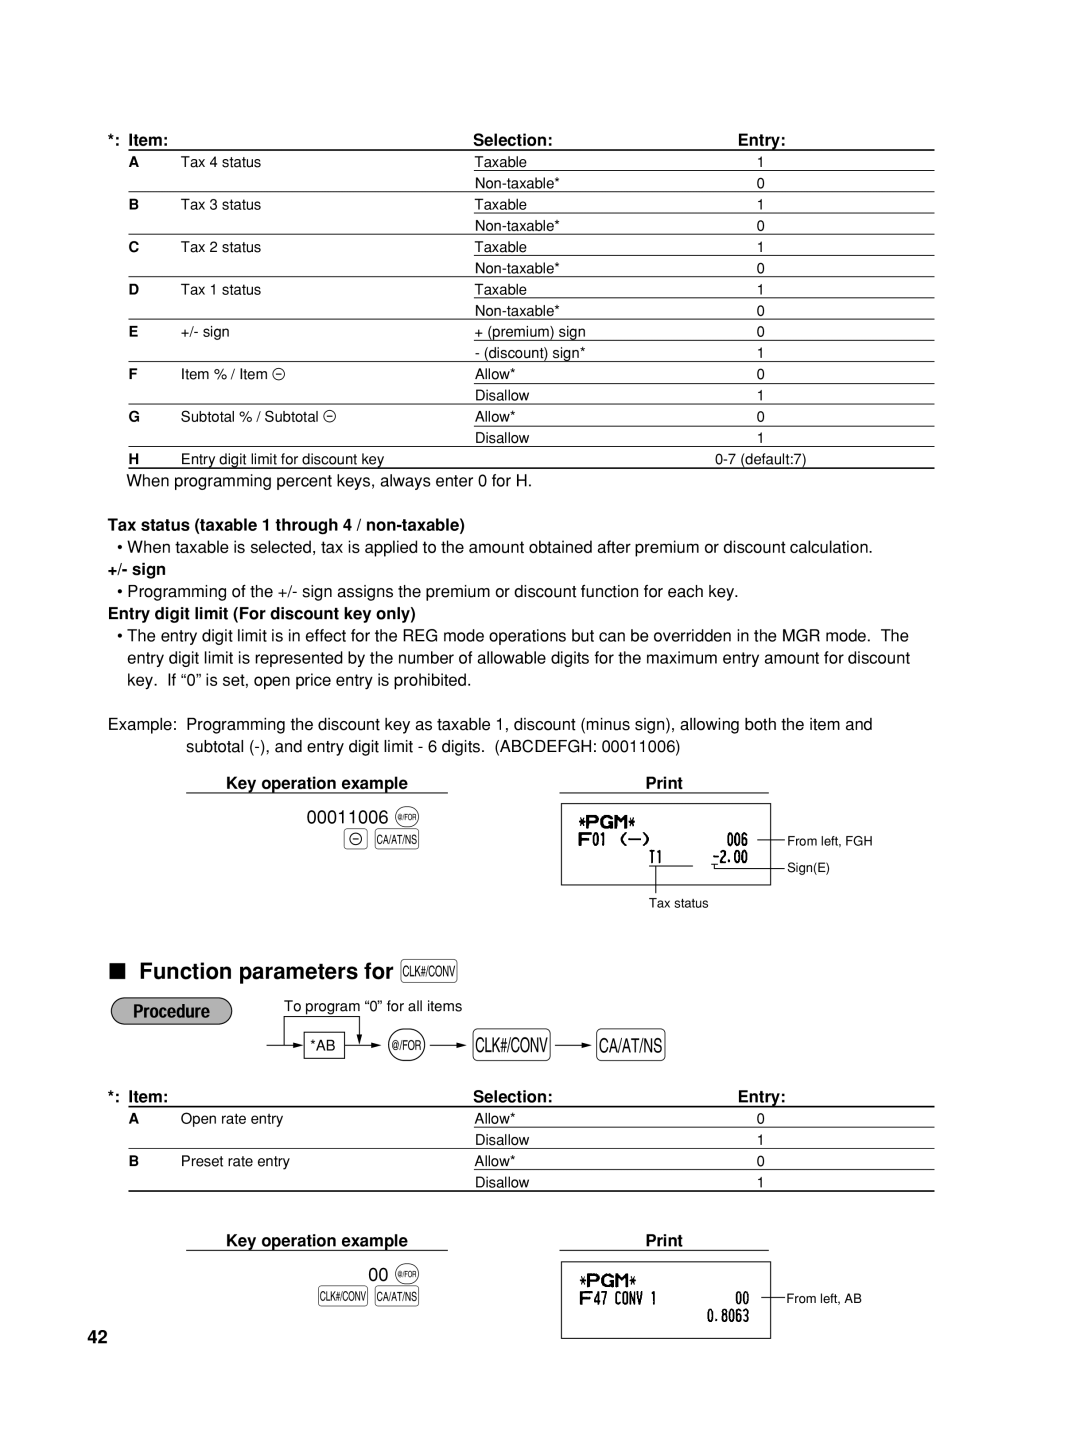 Sharp XE-A42S Function parameters for K, Selection, Entry, Tax status taxable 1 through 4 / non-taxable, +/- sign, Print 